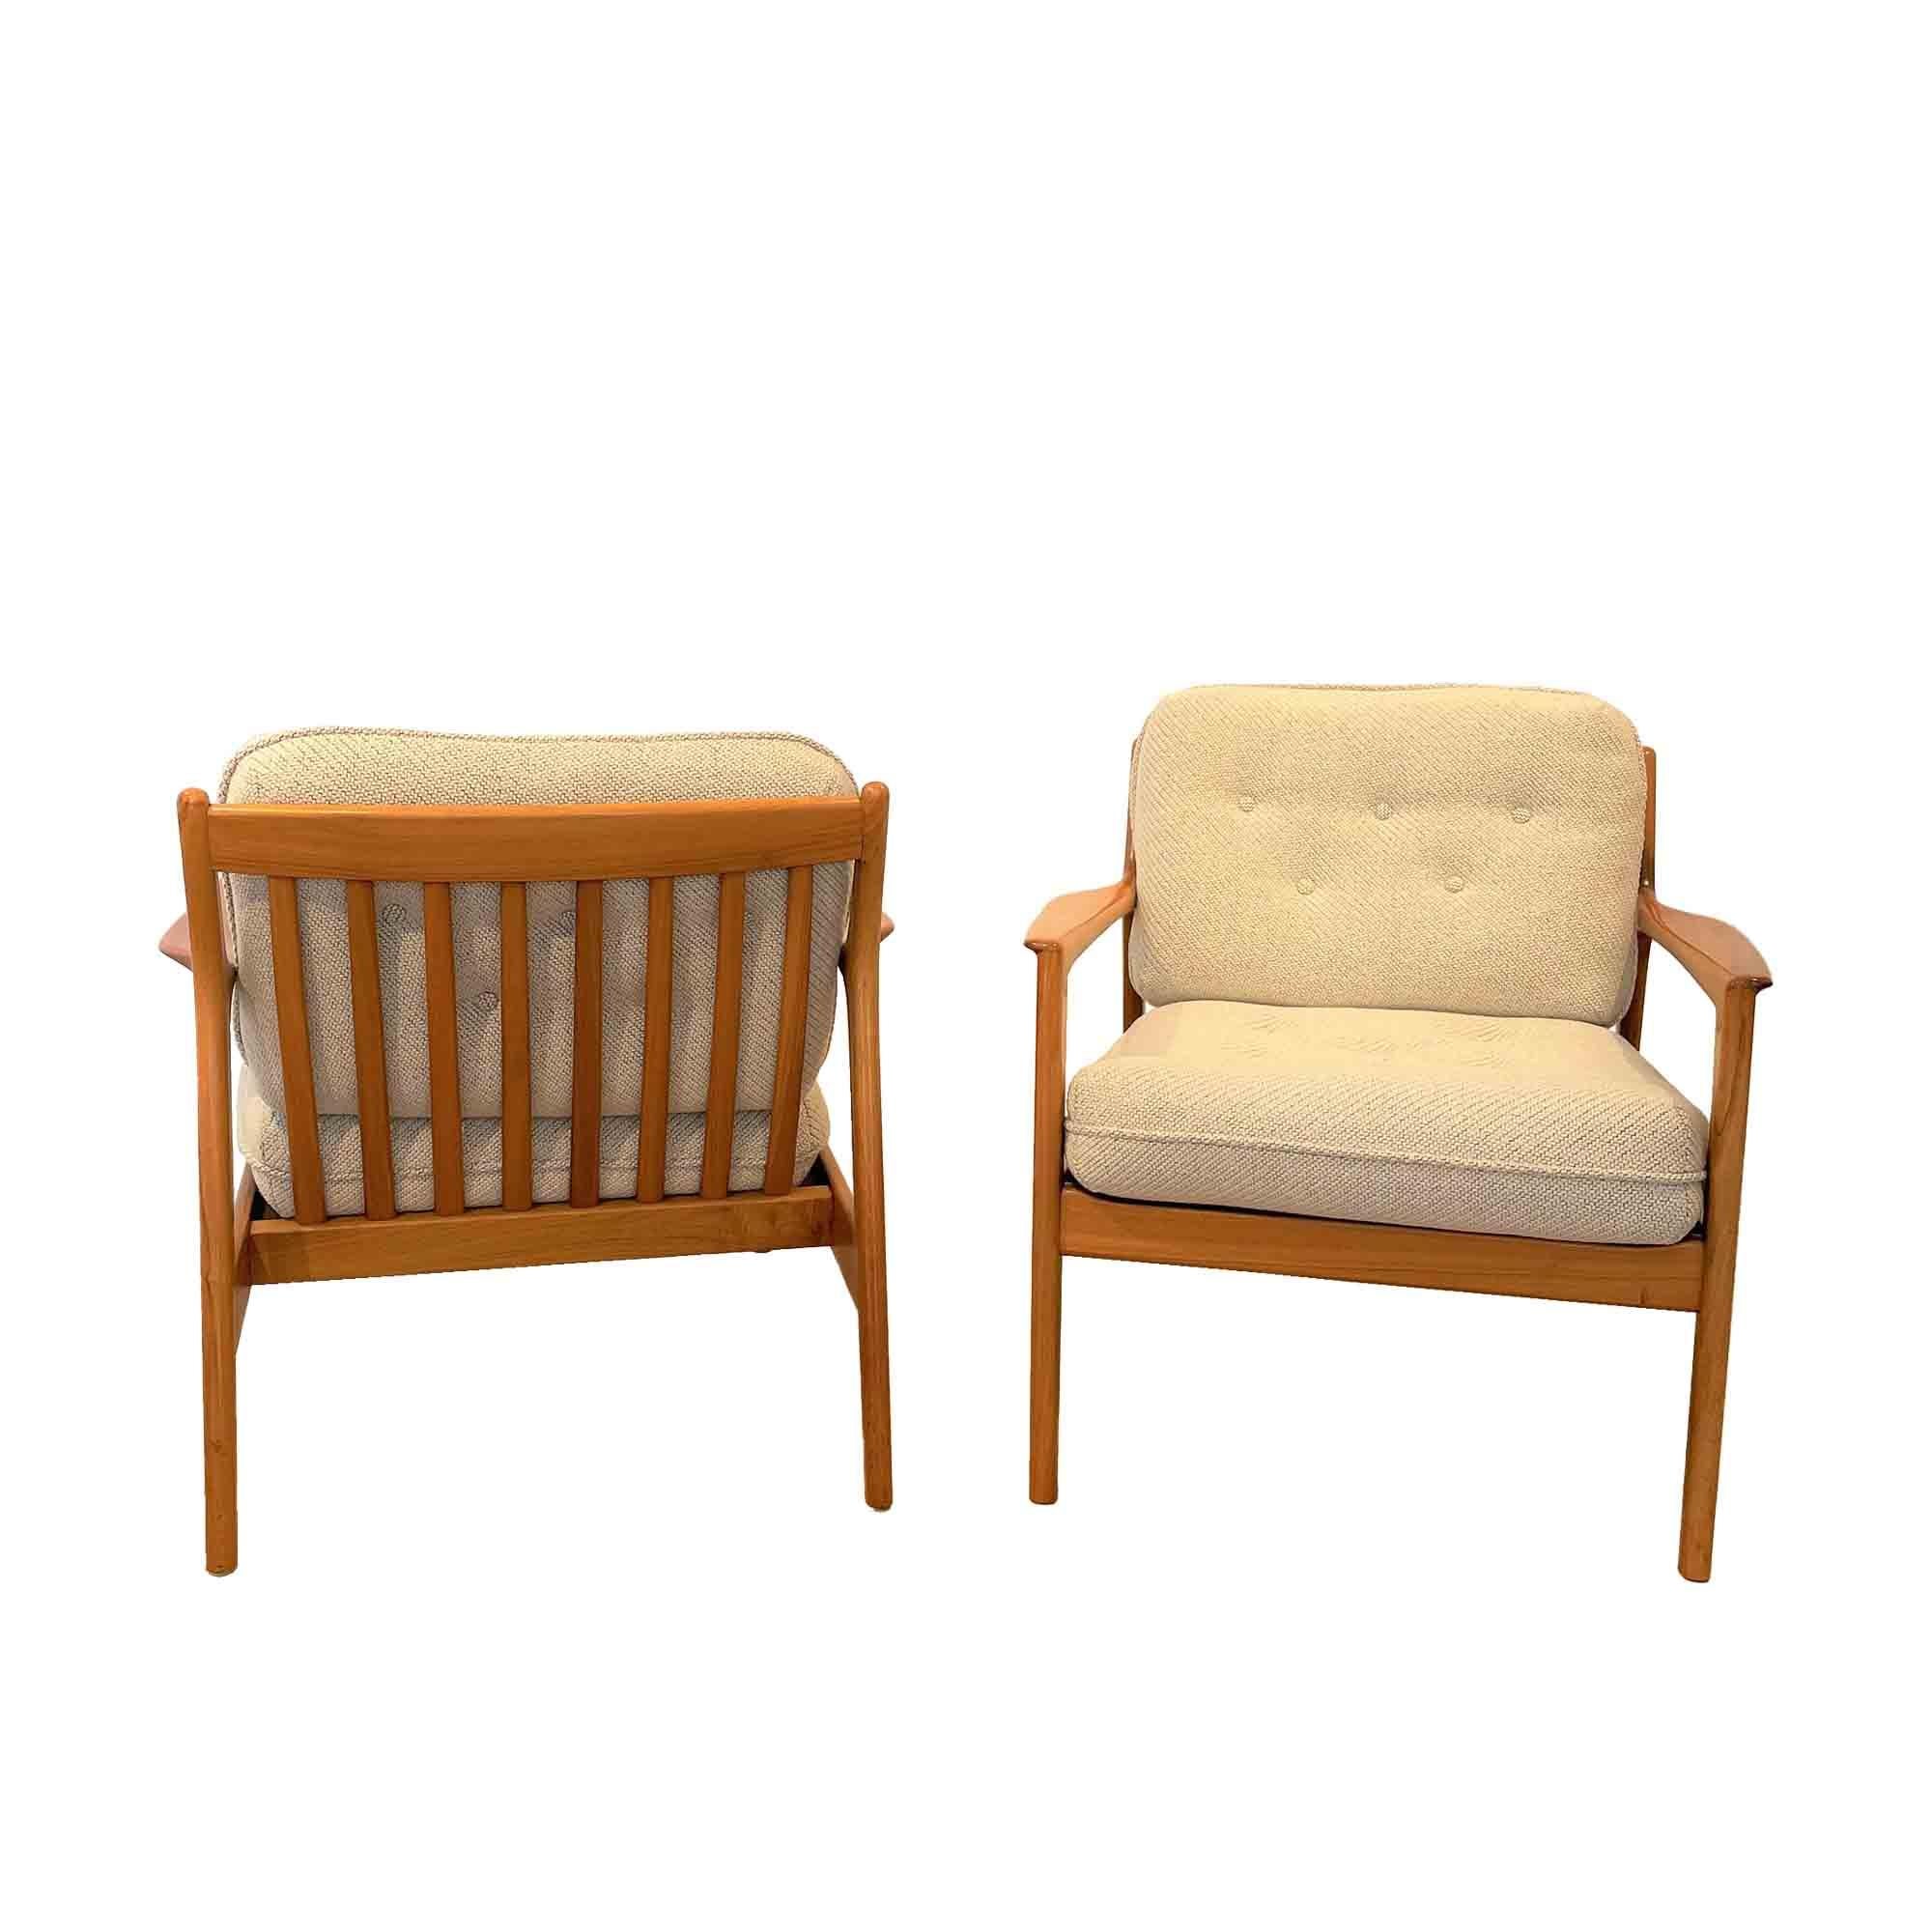 Pair of USA 75 model armchairs in walnut by Swedish designer Folke Ohlsson. The design of these armchairs is distinguished by a very taut line of the armrests and the rear legs with a beautiful grain of the walnut on the sides. The back of these